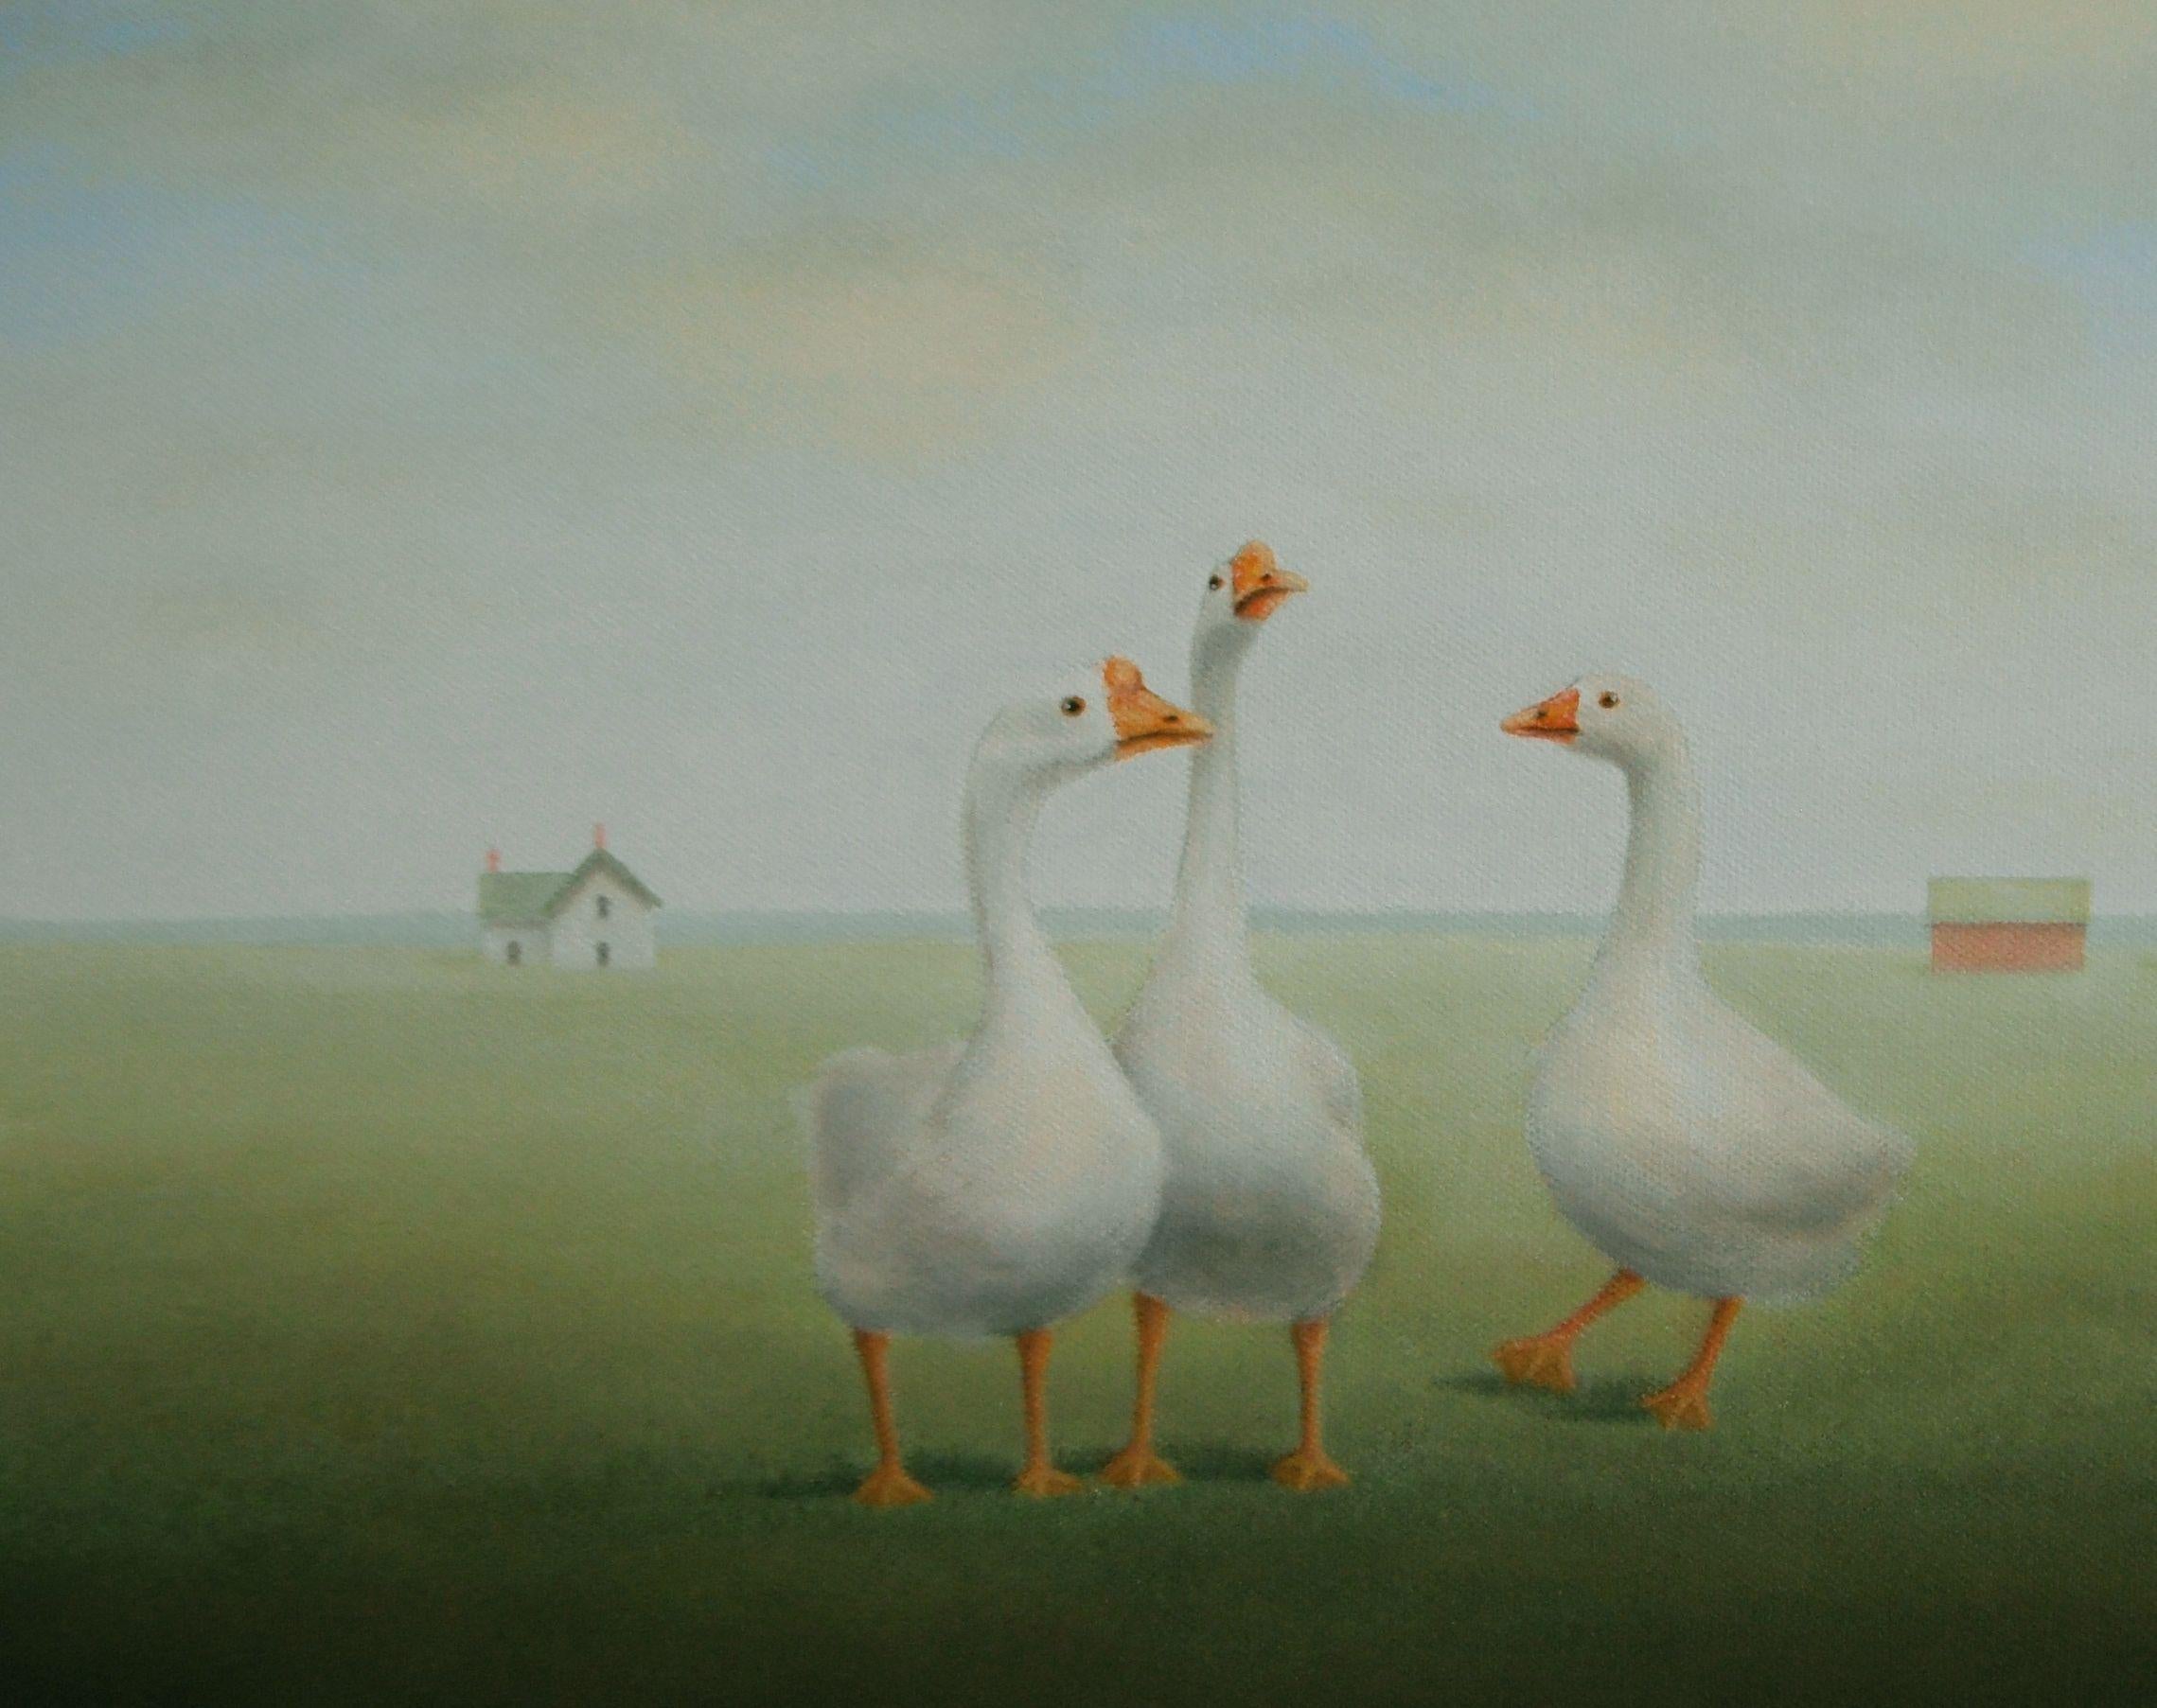 This country landscape scene is from my imagination and was inspired by a trio of geese that I found at a rare breed livestock show a few years ago.  I painted them into a quiet summer farm scene with a traditional old white farmhouse and barn in